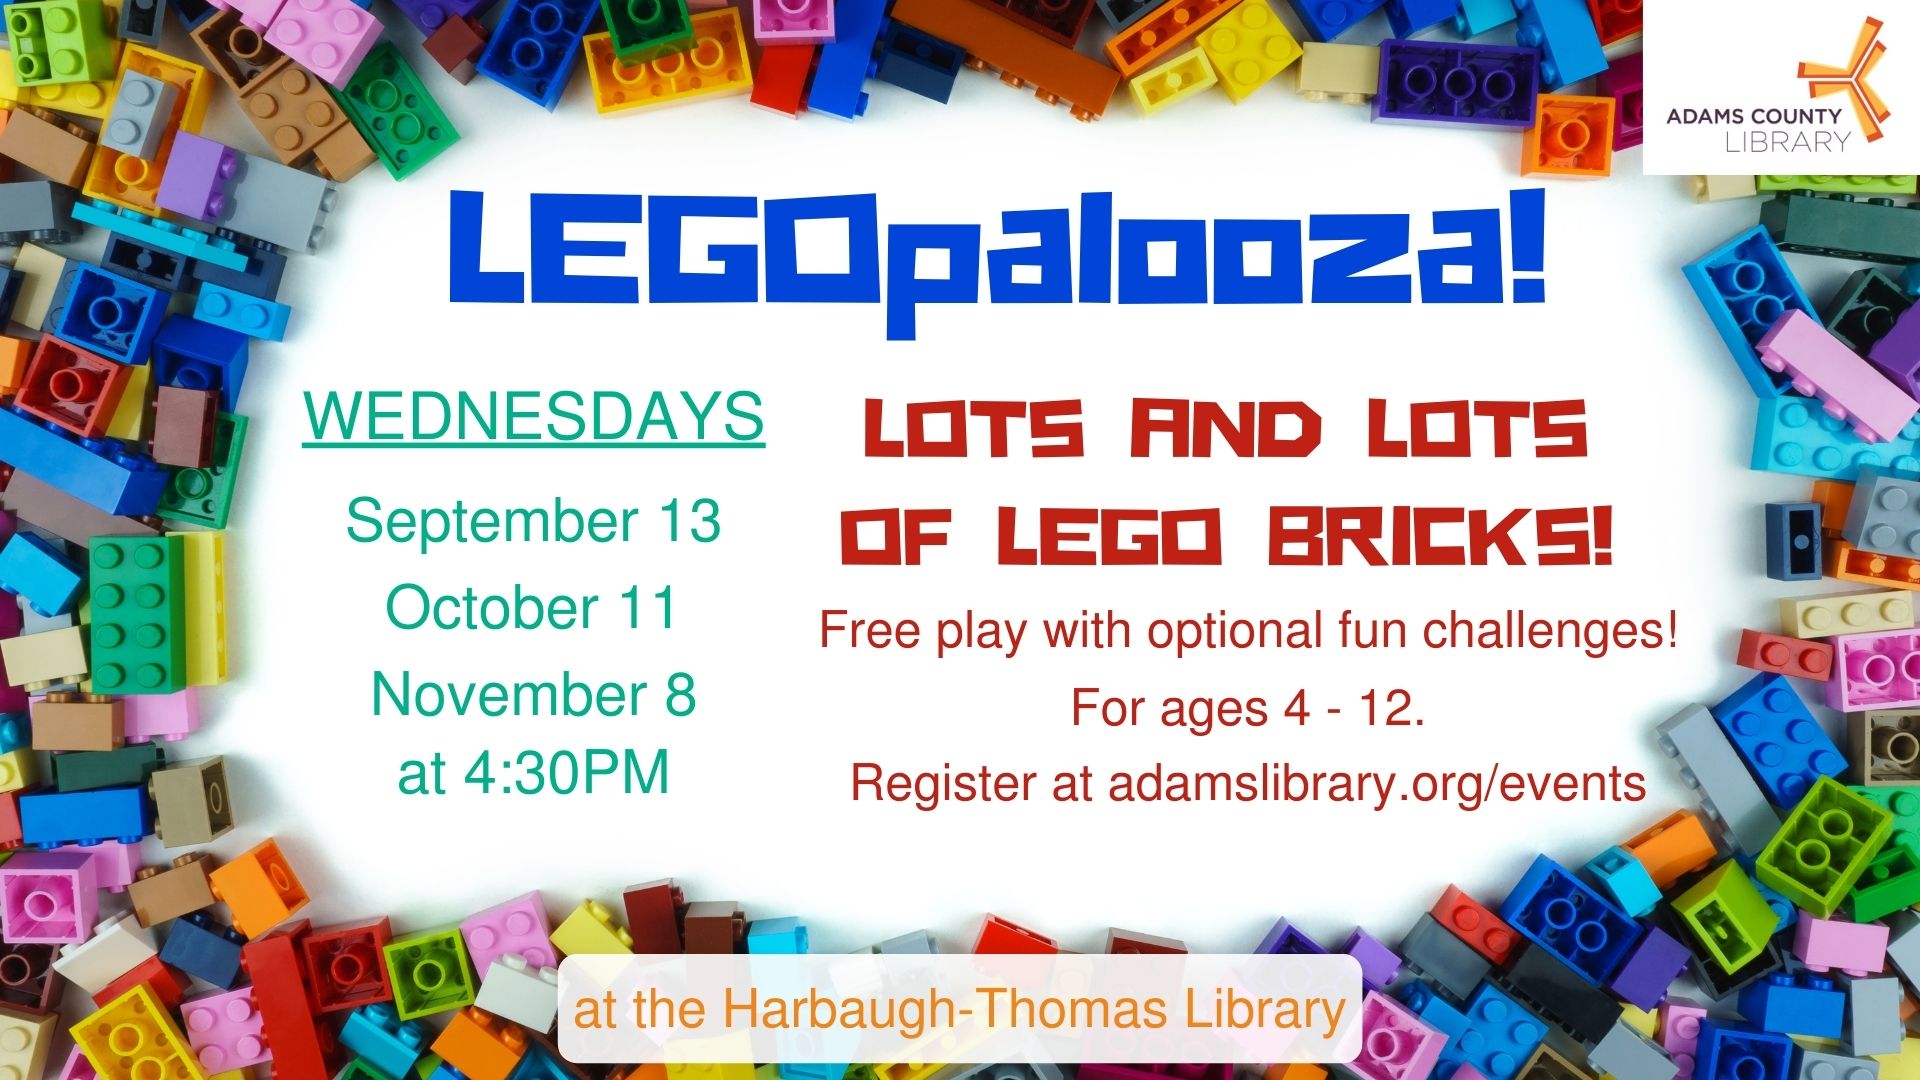 LEGOpalooza! WEDNESDAYS, SEPTEMBER 13 / OCTOBER 11 / NOVEMBER 8 4:30PM. Ages 4-12. Lots and lots of LEGO bricks. Free play with optional fun challenges!